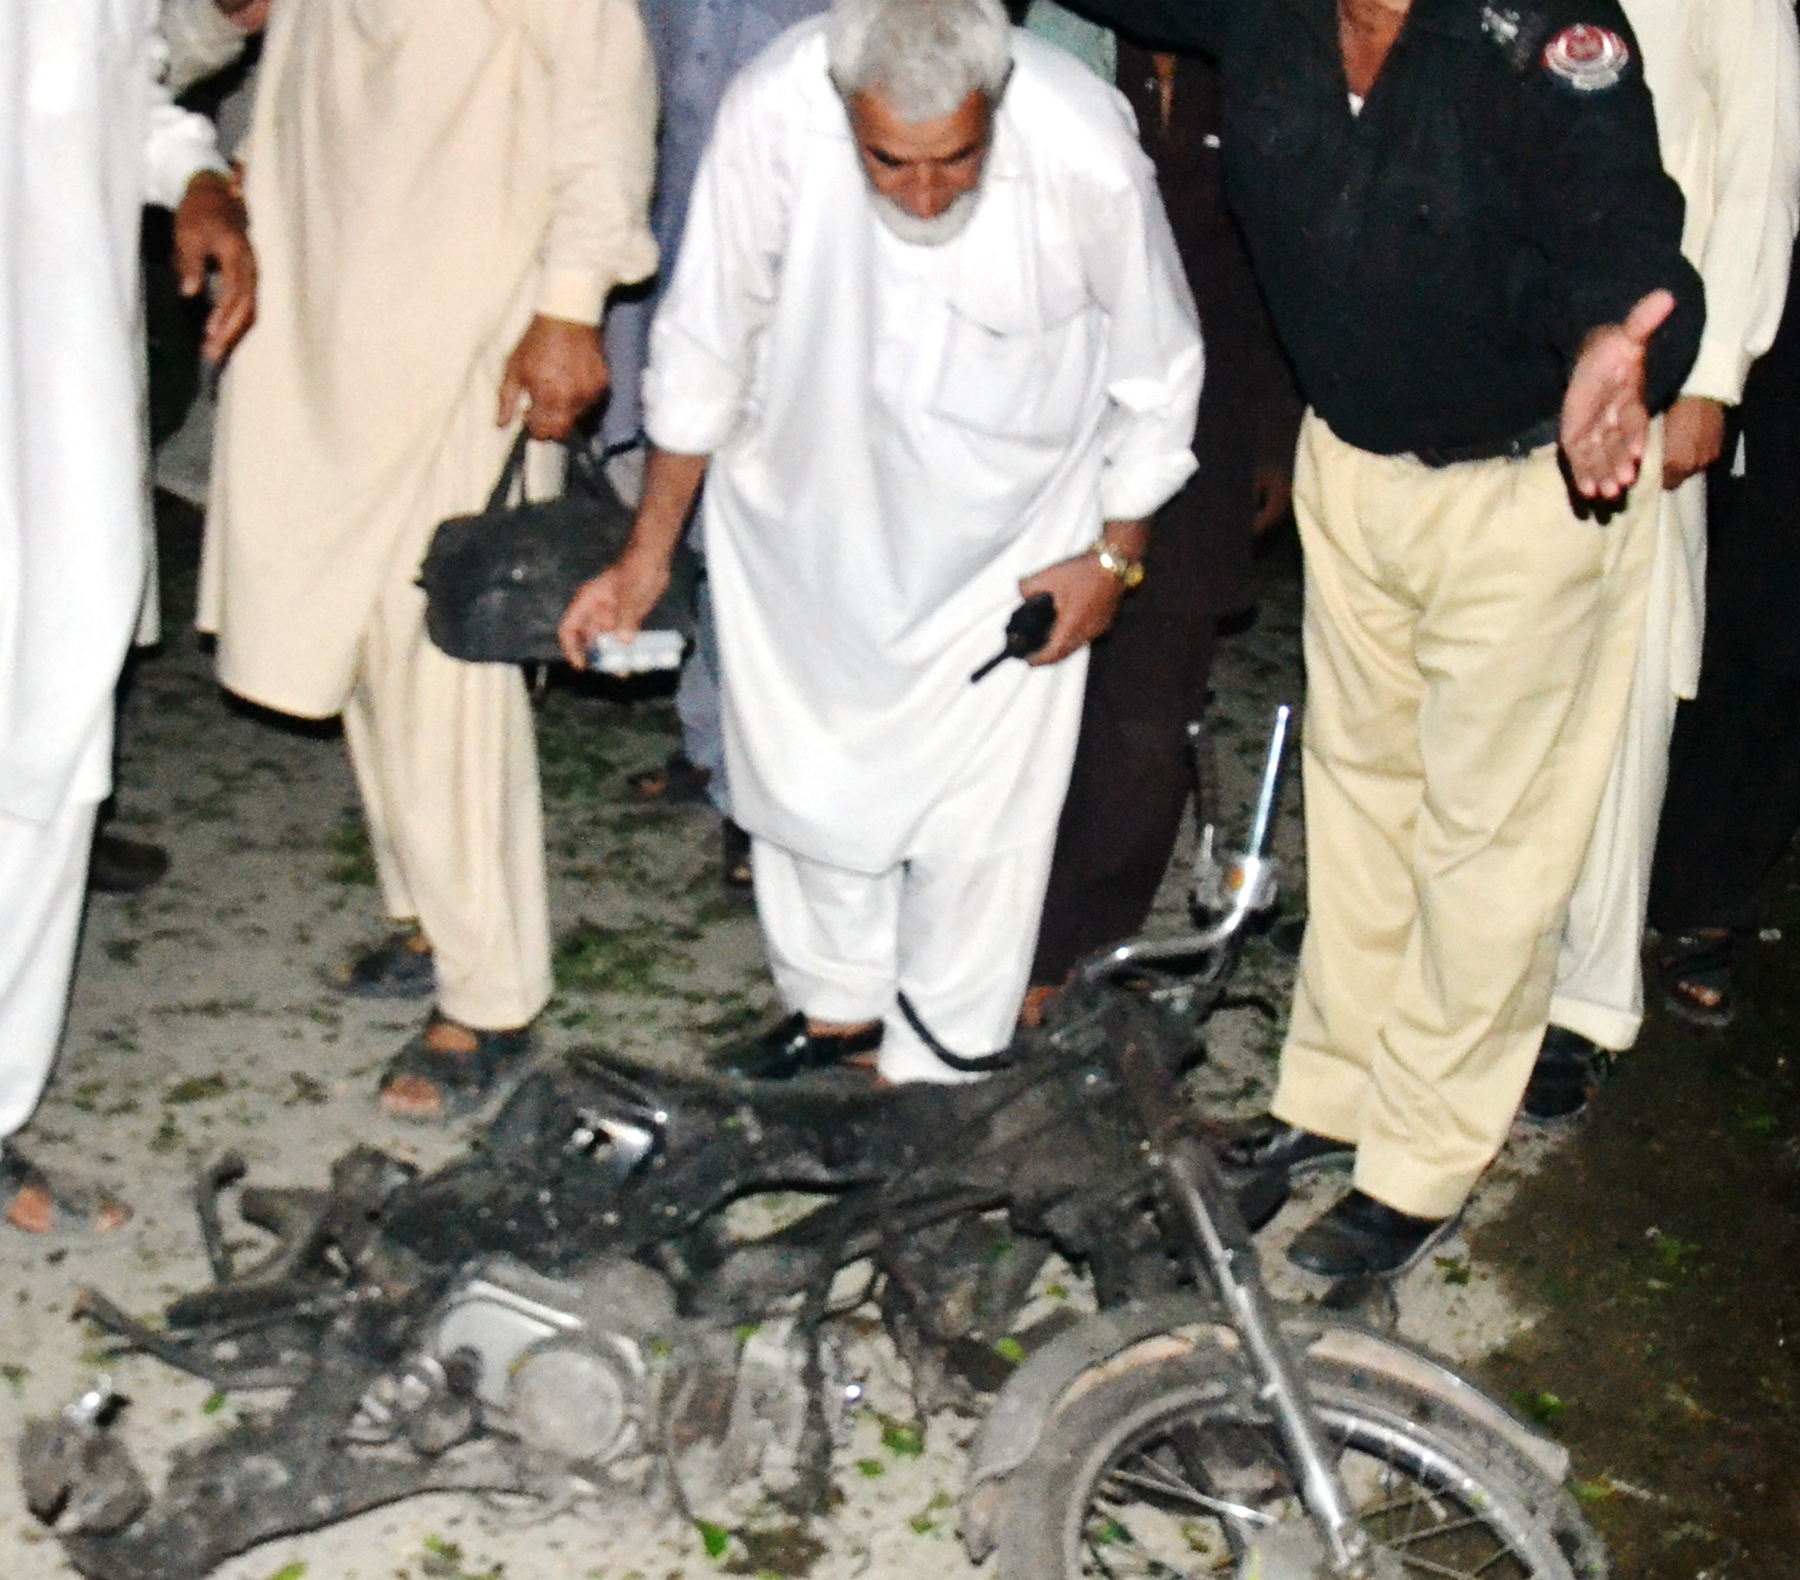 bomb disposal officials inspect the motorcycle used in the bombing photo sameer raziq